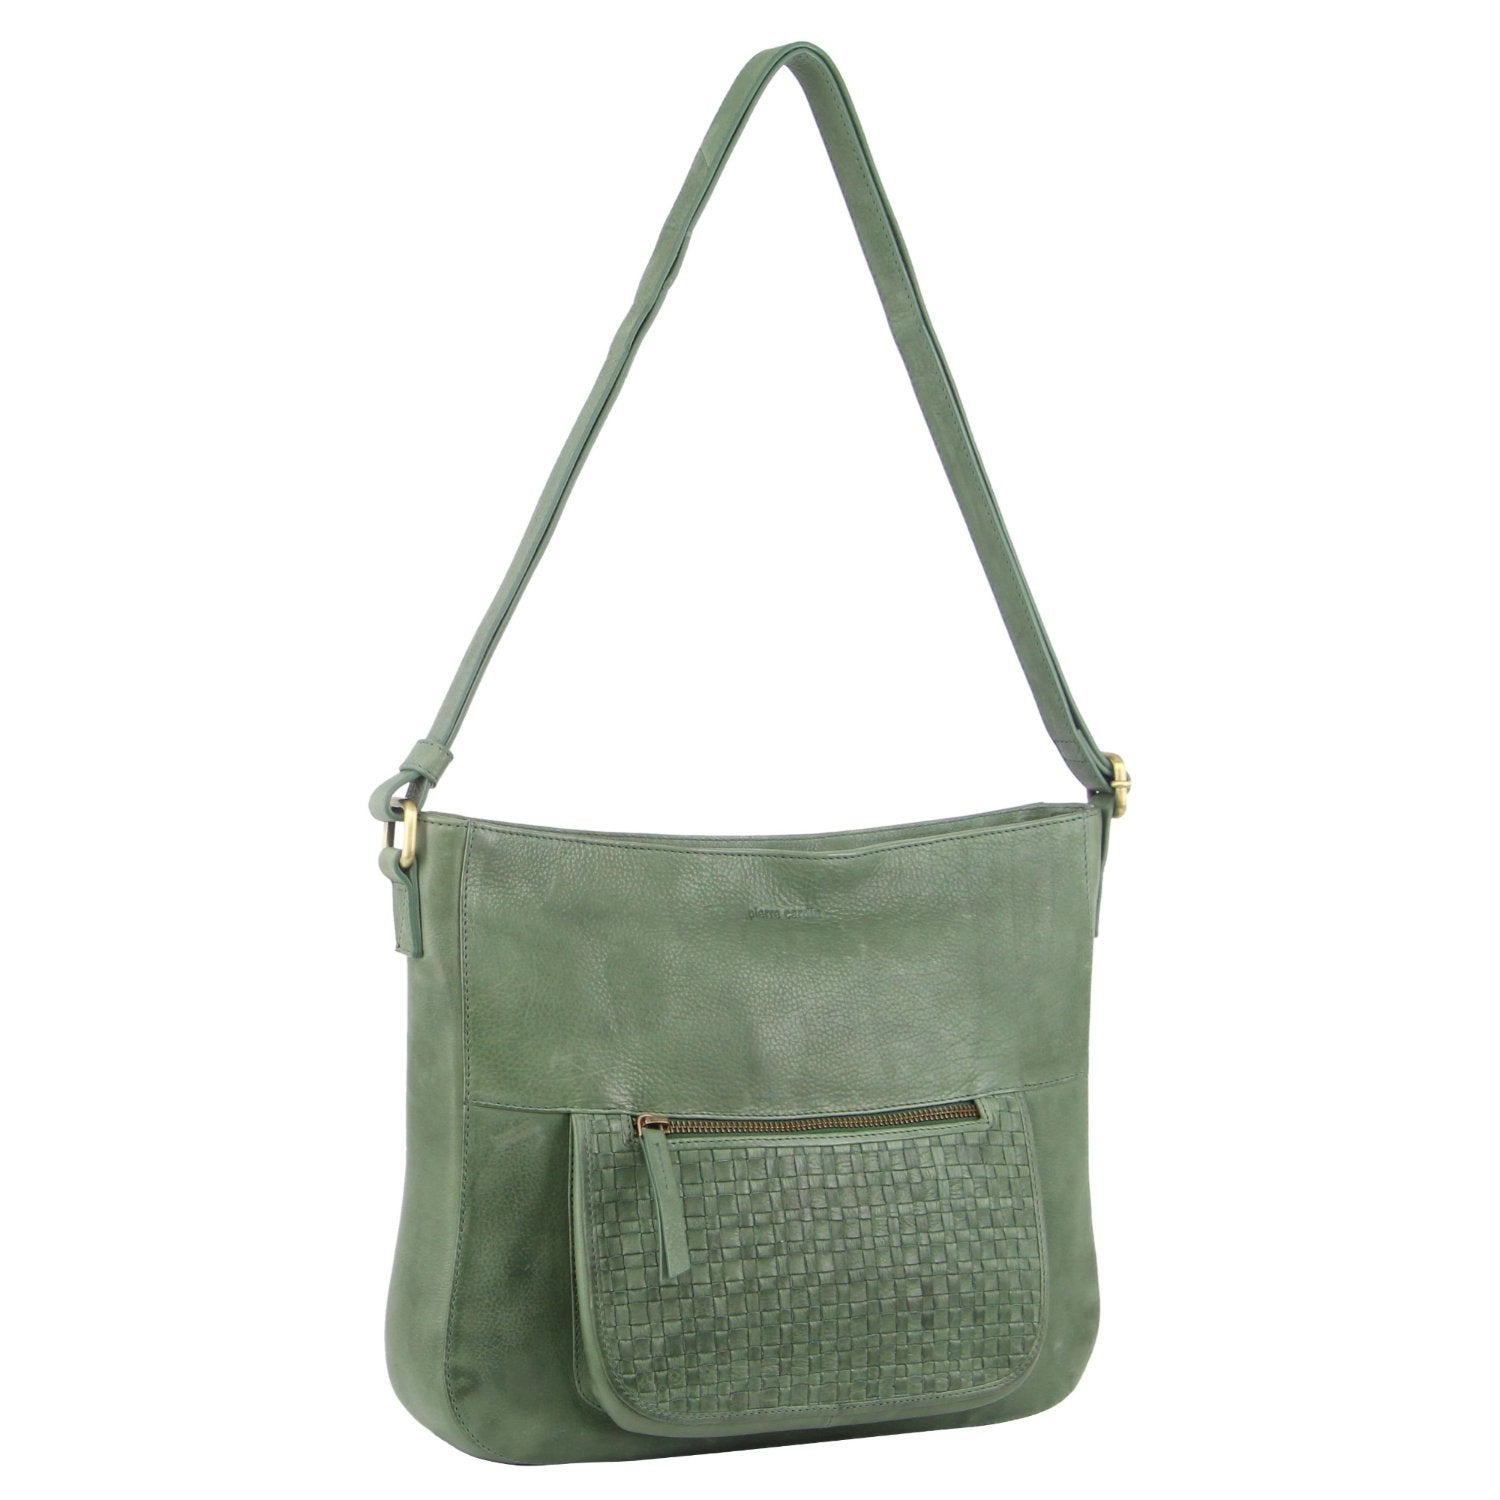 Pierre Cardin Large Woven Embossed Leather Crossbody Bag in Green